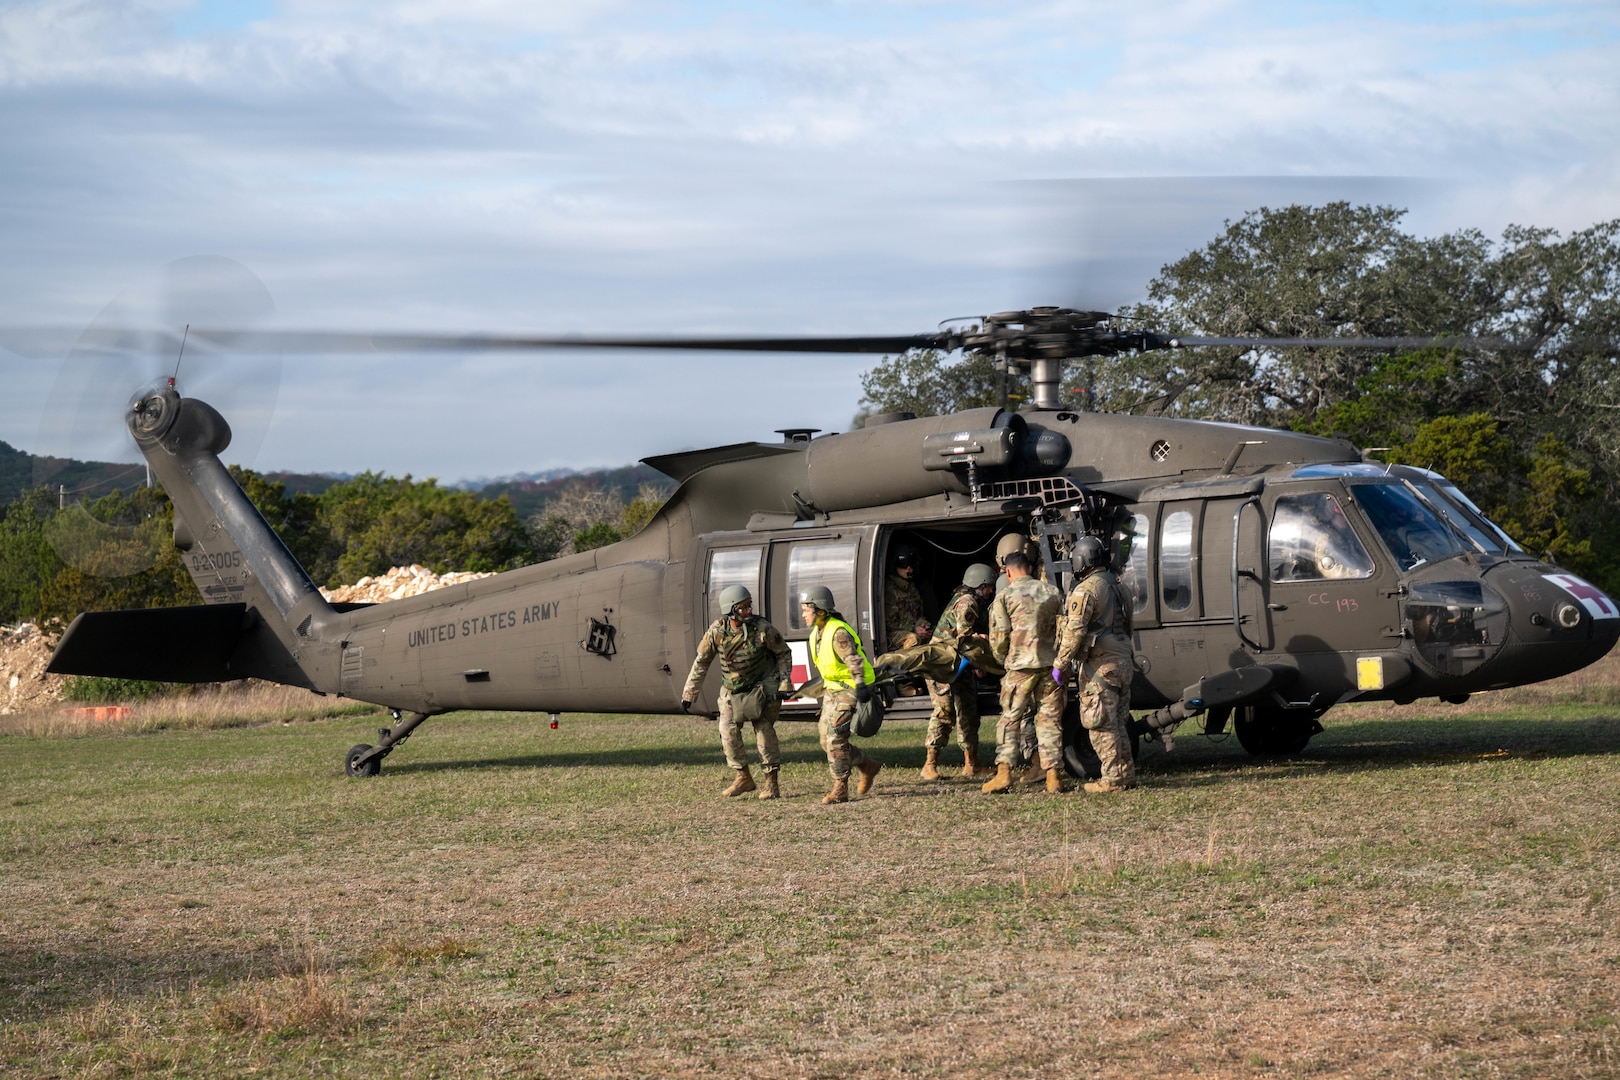 Airmen transport simulated patients from a UH-60 on Dec. 7, 2023, at Joint Base San Antonio-Camp Bullis, Texas, during Operation AGILE Medic. This joint force medical training exercise involves hands-on scenarios in an austere environment, providing medics with crucial experience in communication and diverse medical skills. (U.S. Air Force photo by Senior Airman Melody Bordeaux)